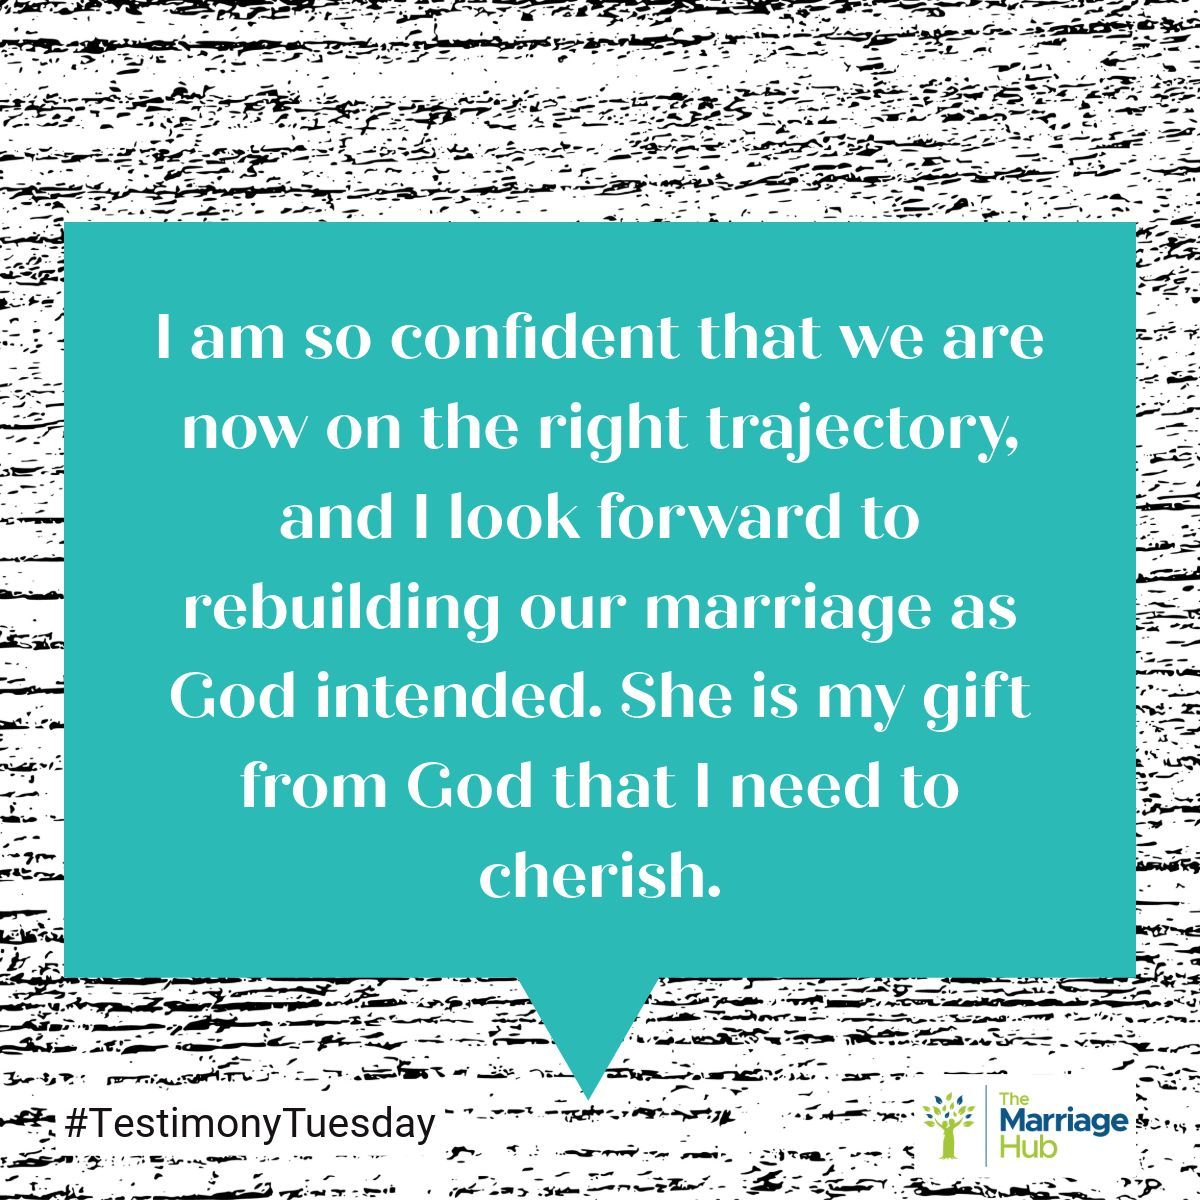 I am go glad that this husband can see that his wife is a gift from God. I pray that they continue on a path to full healing.

#Testimony #TestimonyTuesday #TheMarriageHub #HouseOnTheRock #Marriage